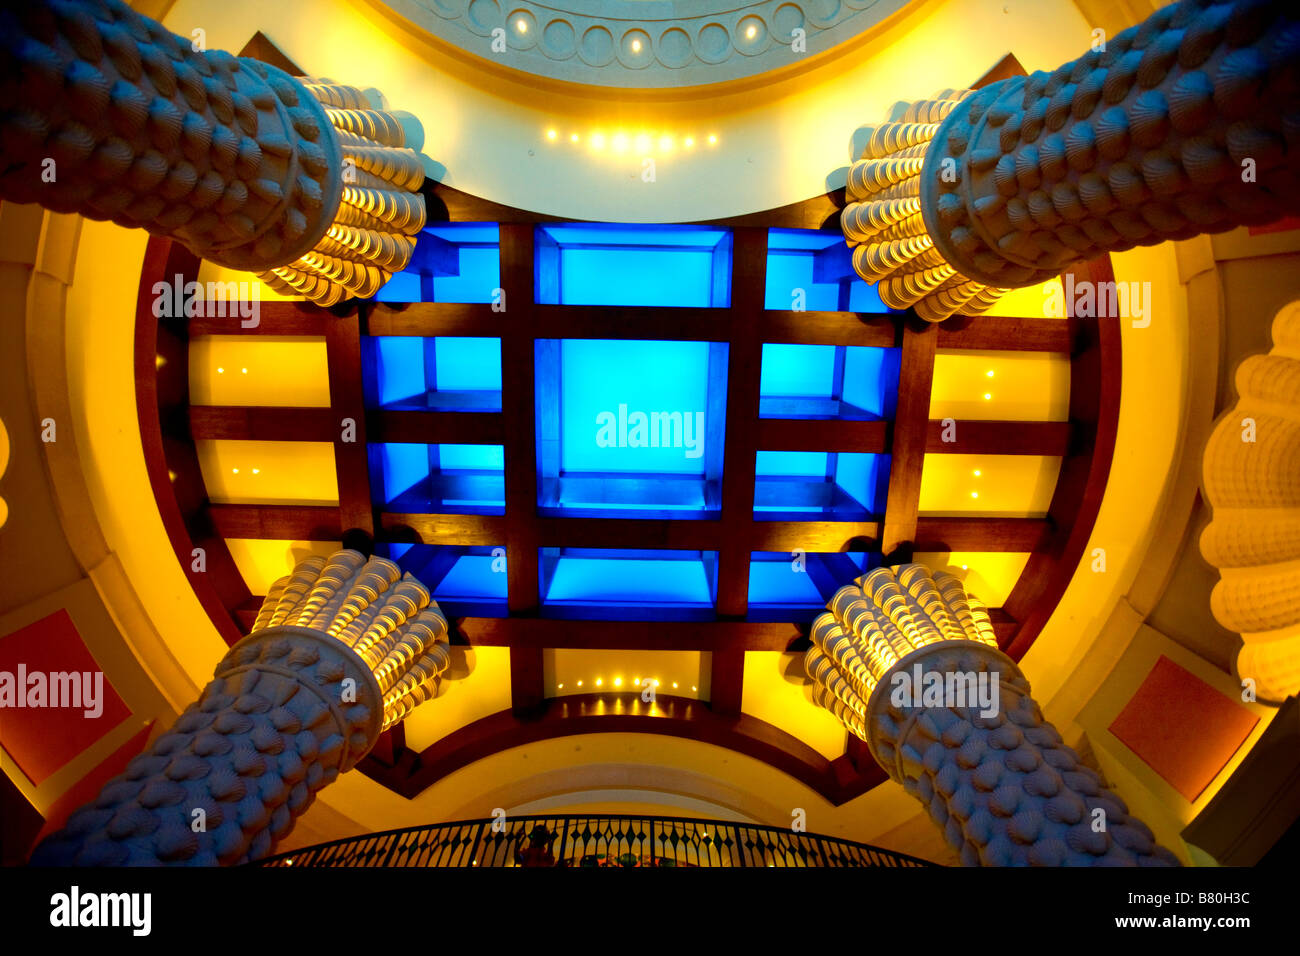 Ceiling of the lobby of Atlantis hotel in Palm Jumeirah Stock Photo